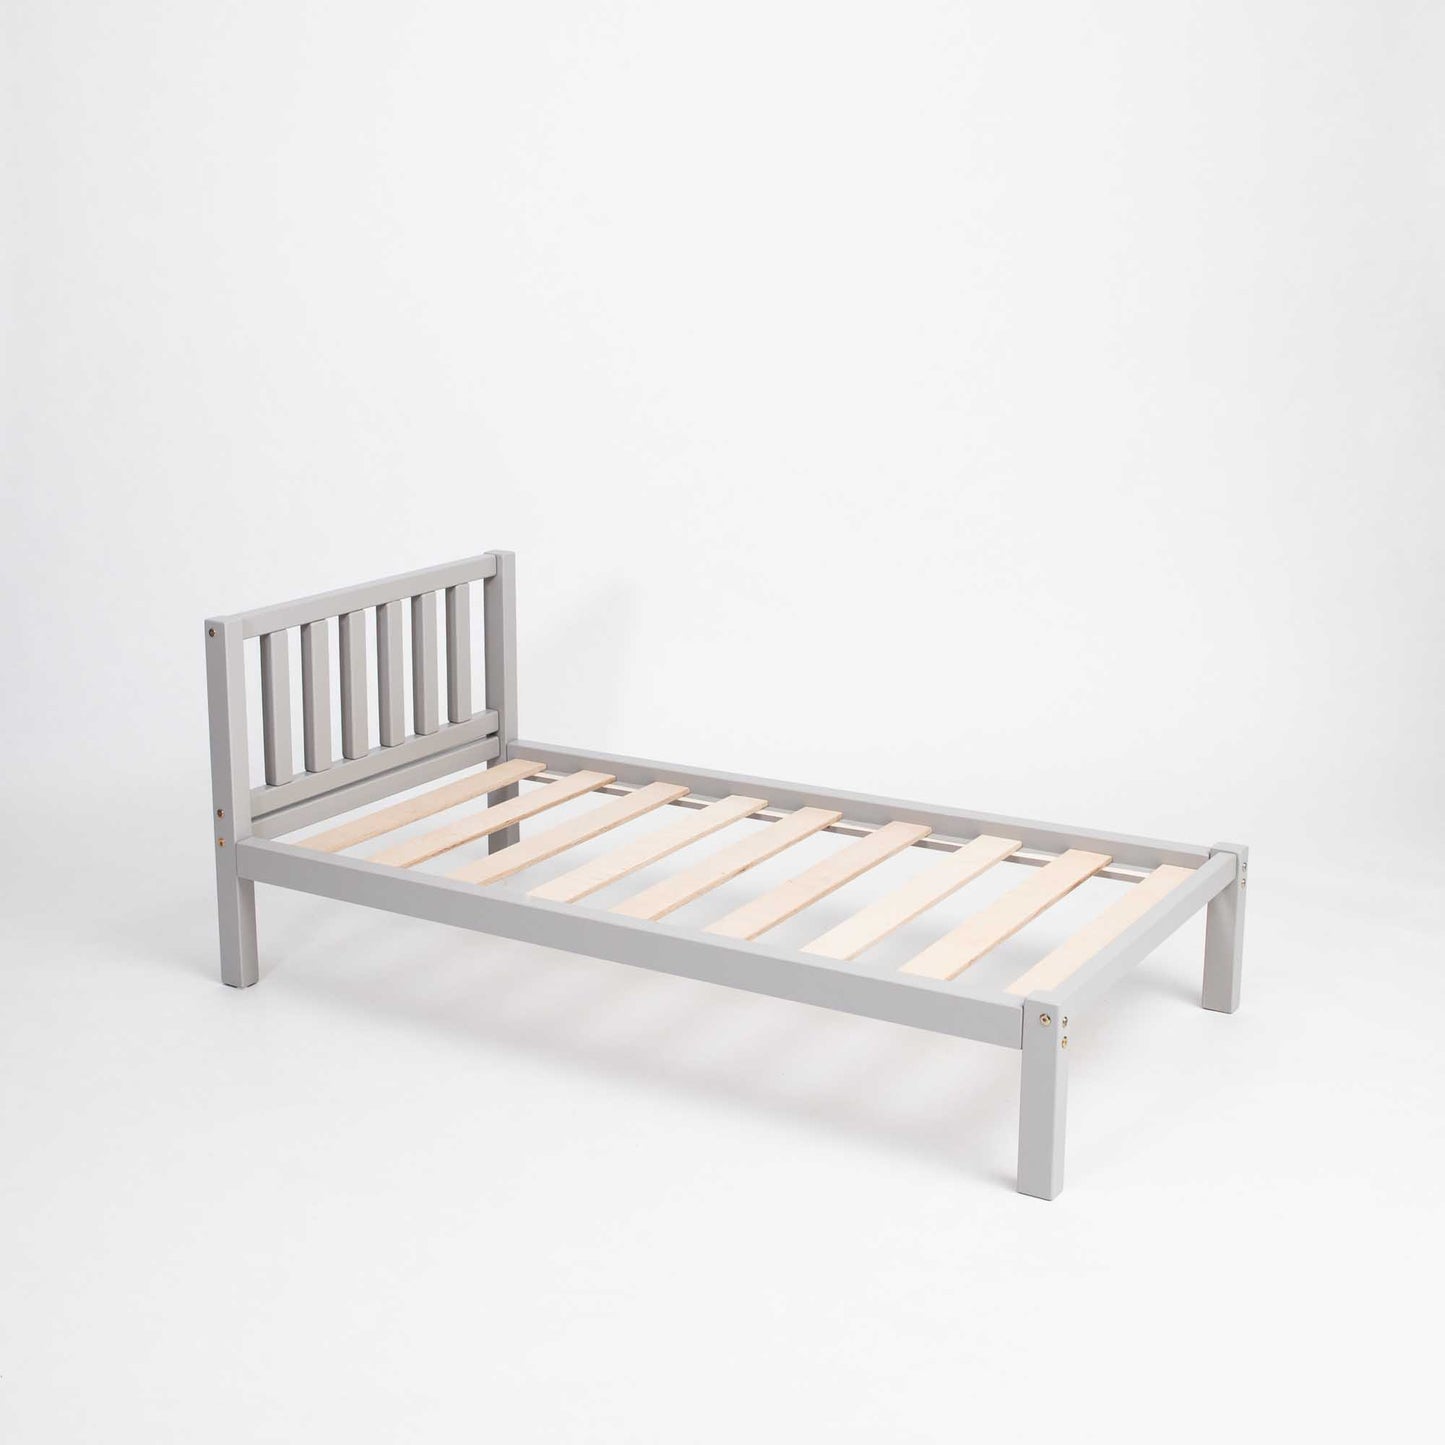 A Sweet Home From Wood 2-in-1 toddler bed on legs with a vertical rail headboard, with wooden slats.